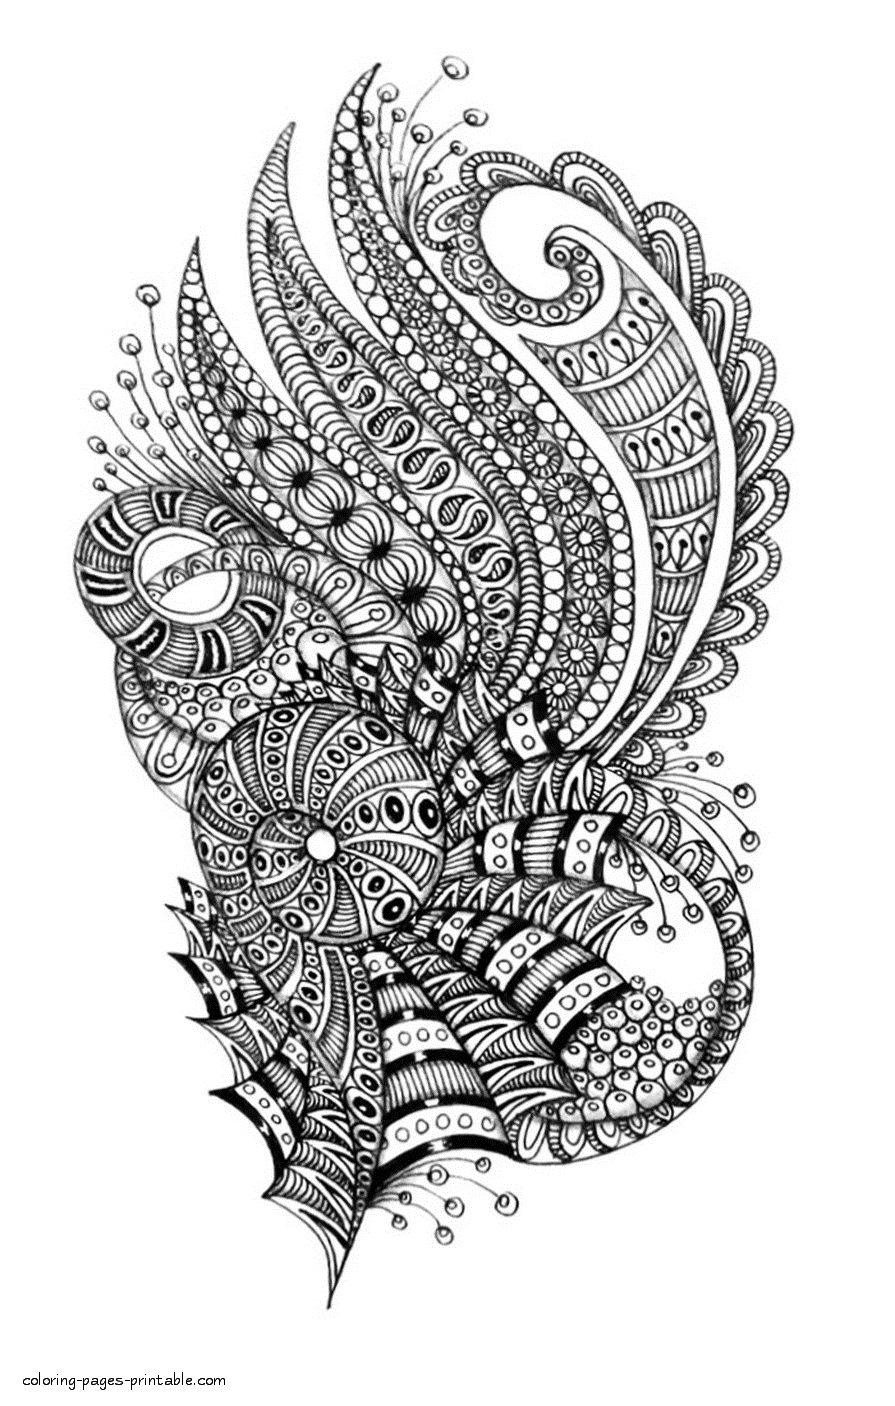 Awesome Flower Coloring Pages To Print For Adults